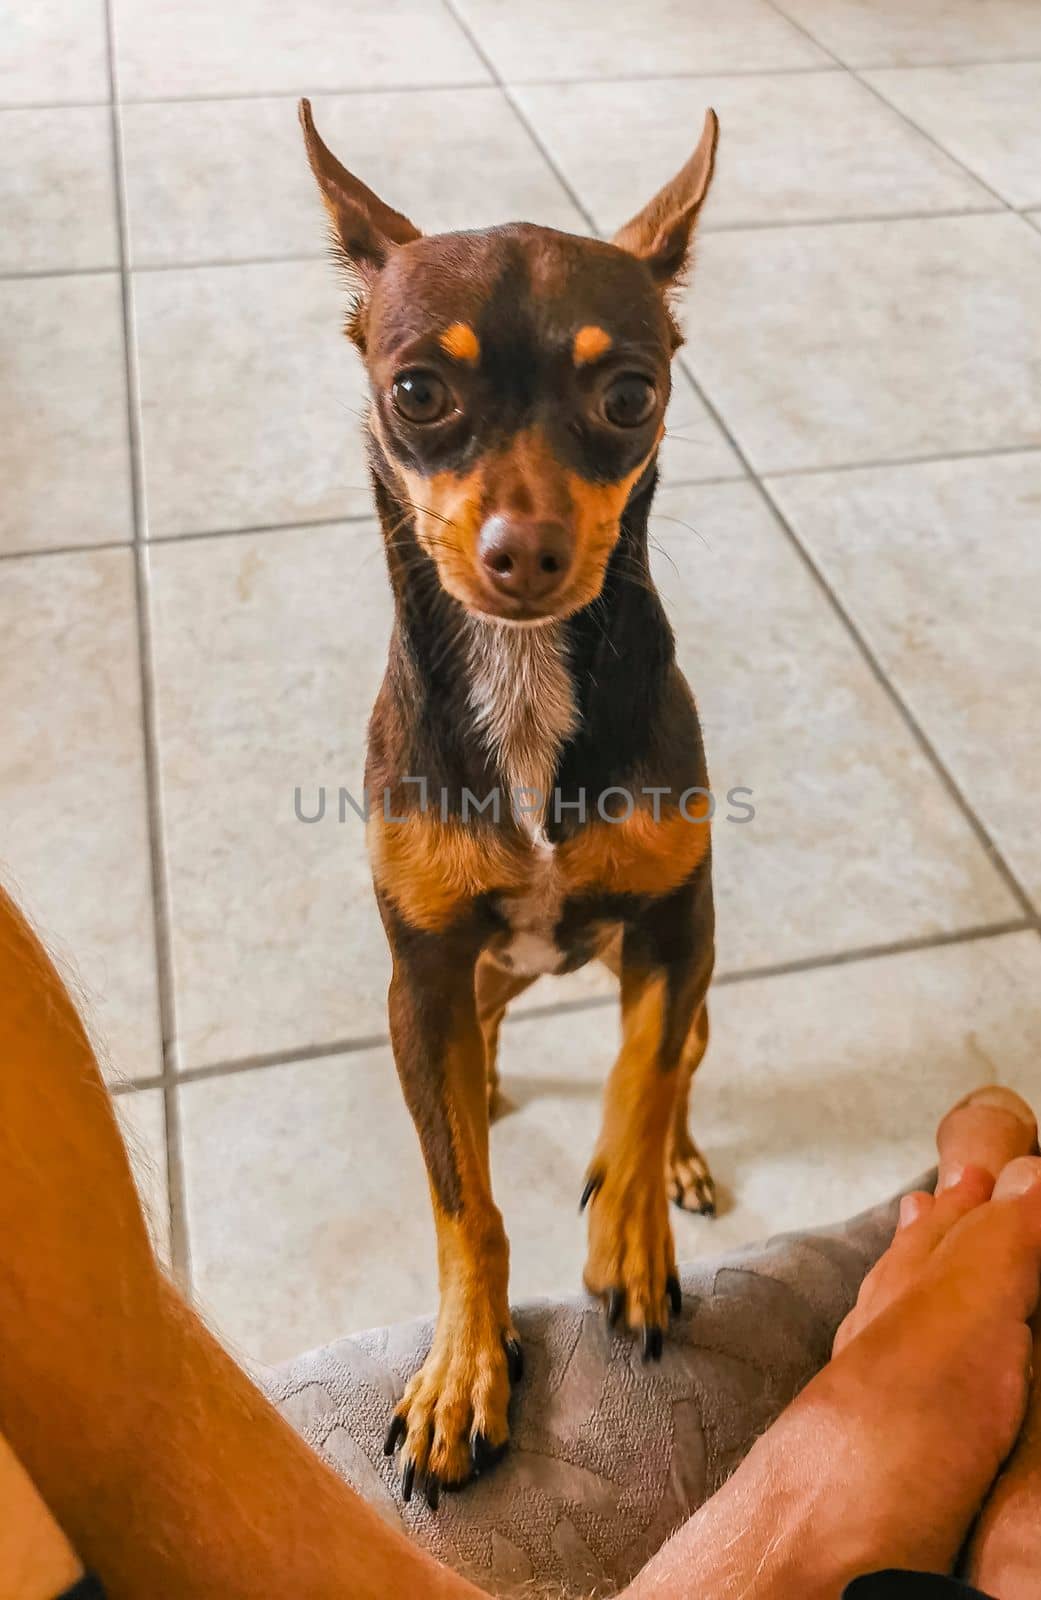 Portrait of a Mexican brown playful russian toy terrier dog while playing looking lovely and cute in the camera in Playa del Carmen Mexico.